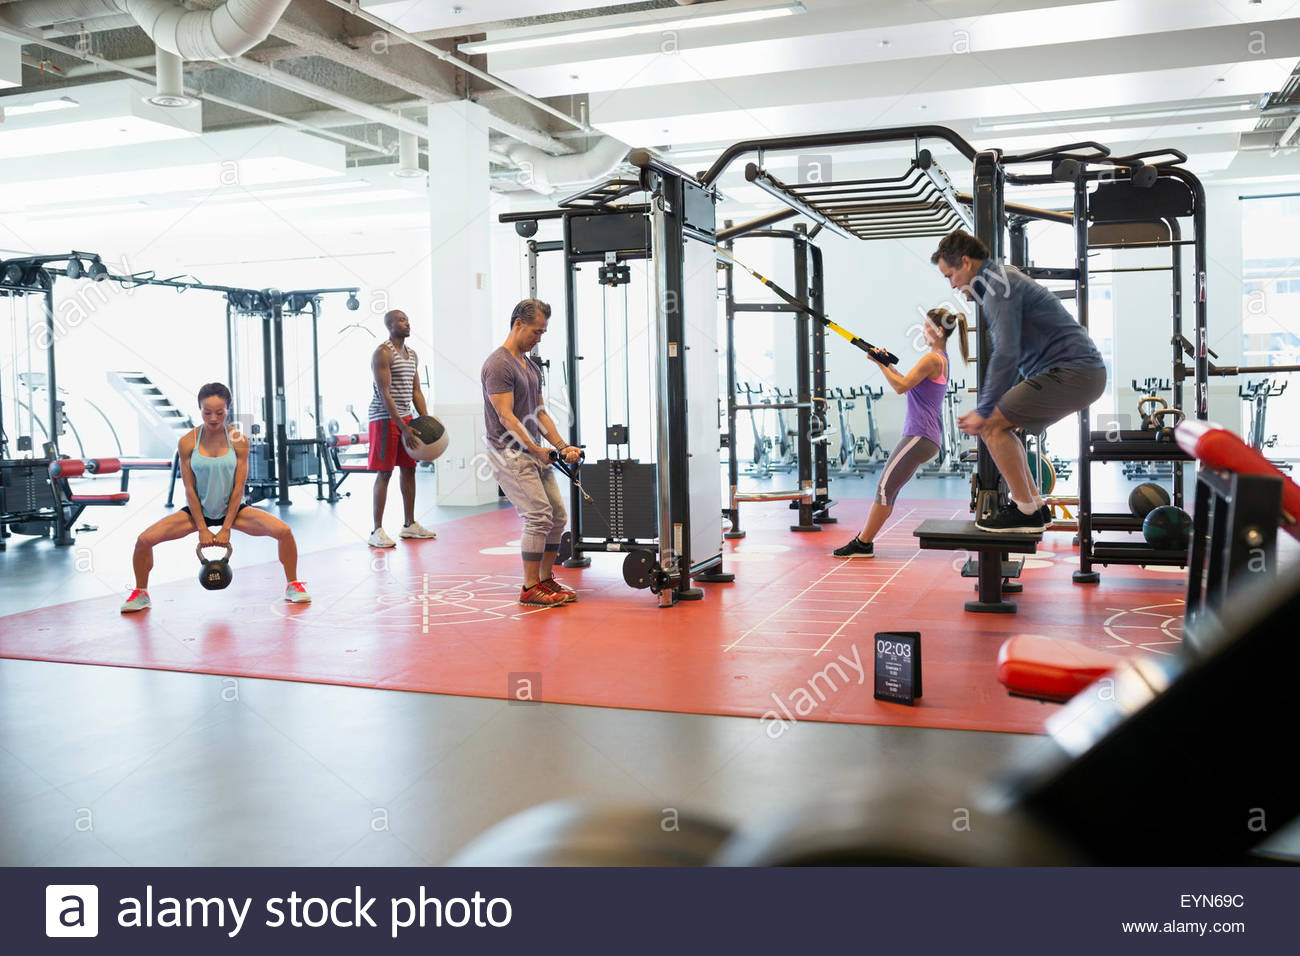 People exercising in gym Stock Photo